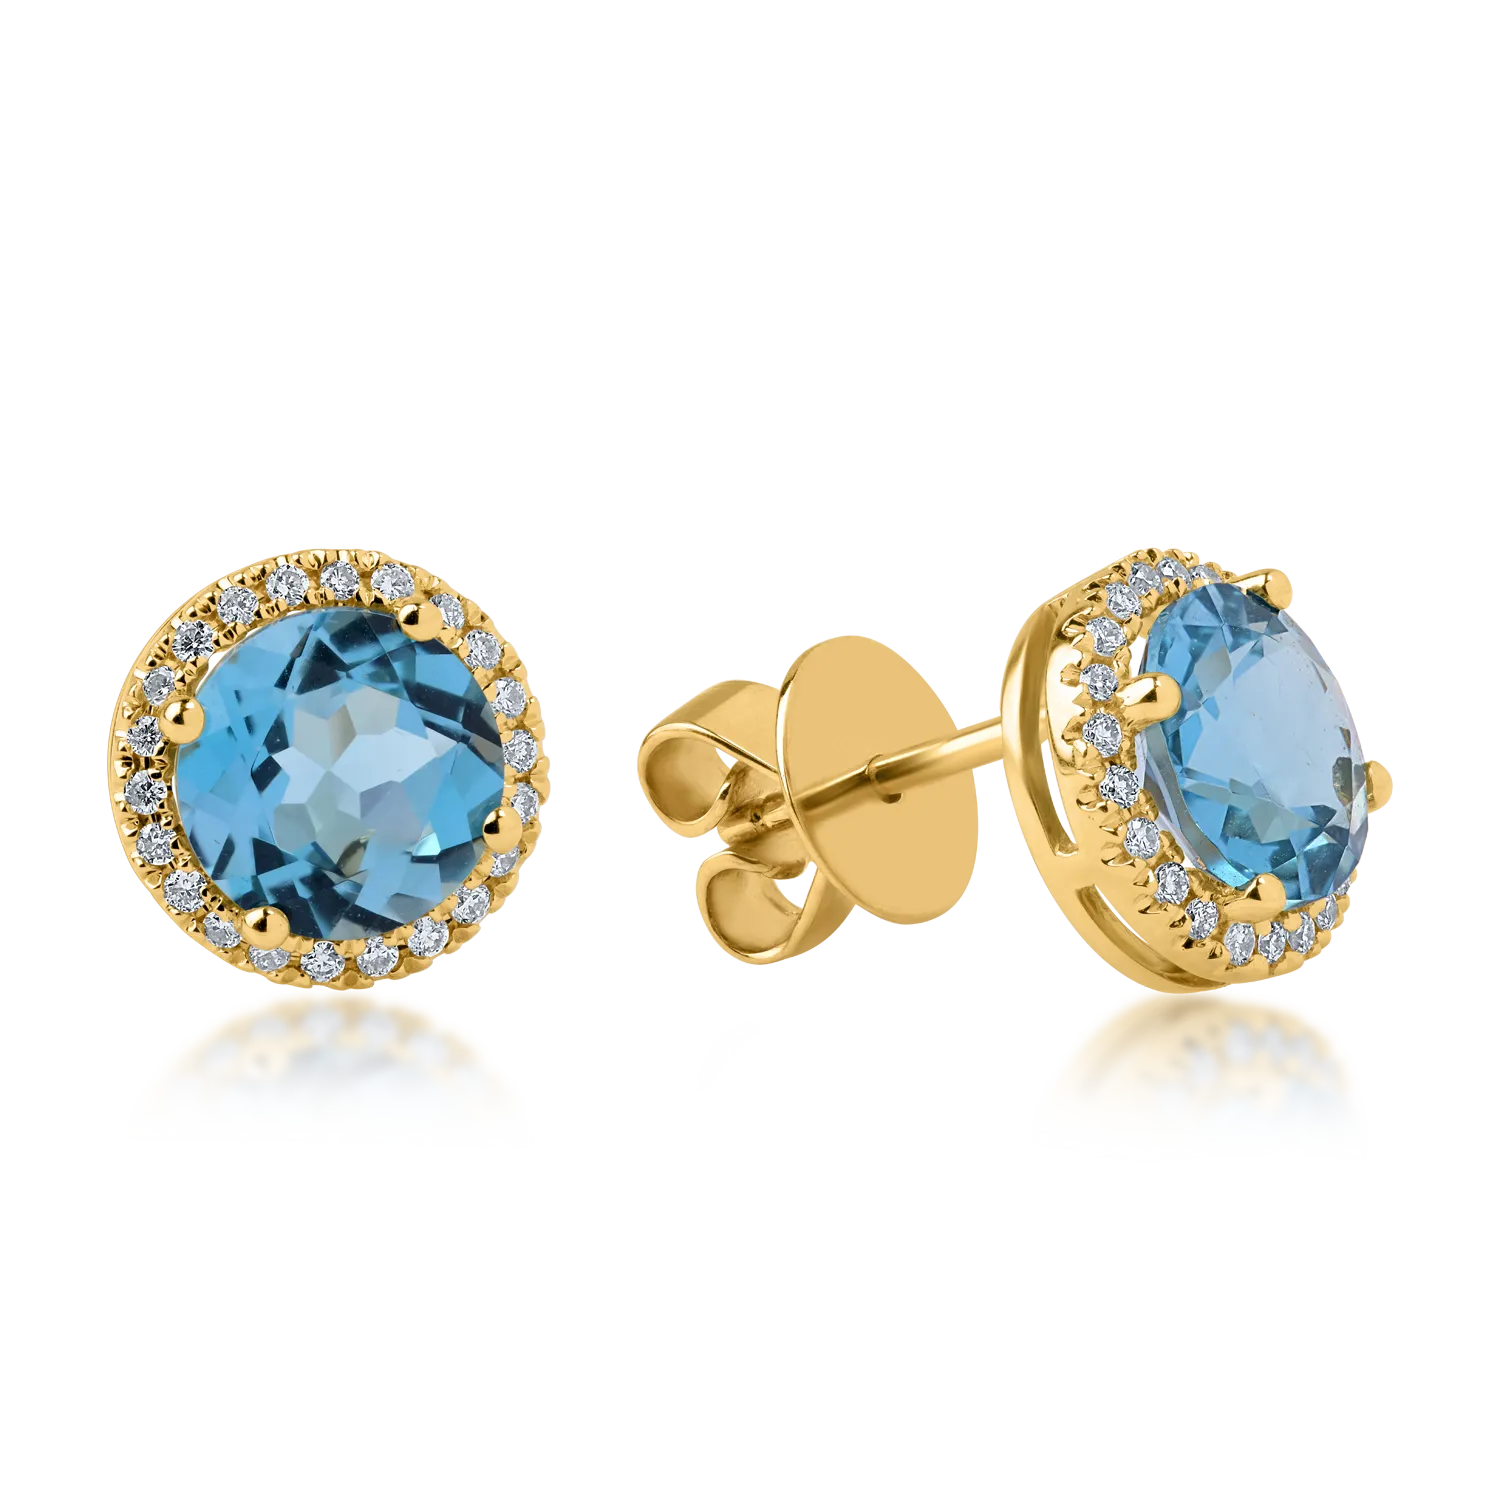 Yellow gold earrings with 3.1ct blue topazes and 0.2ct diamonds